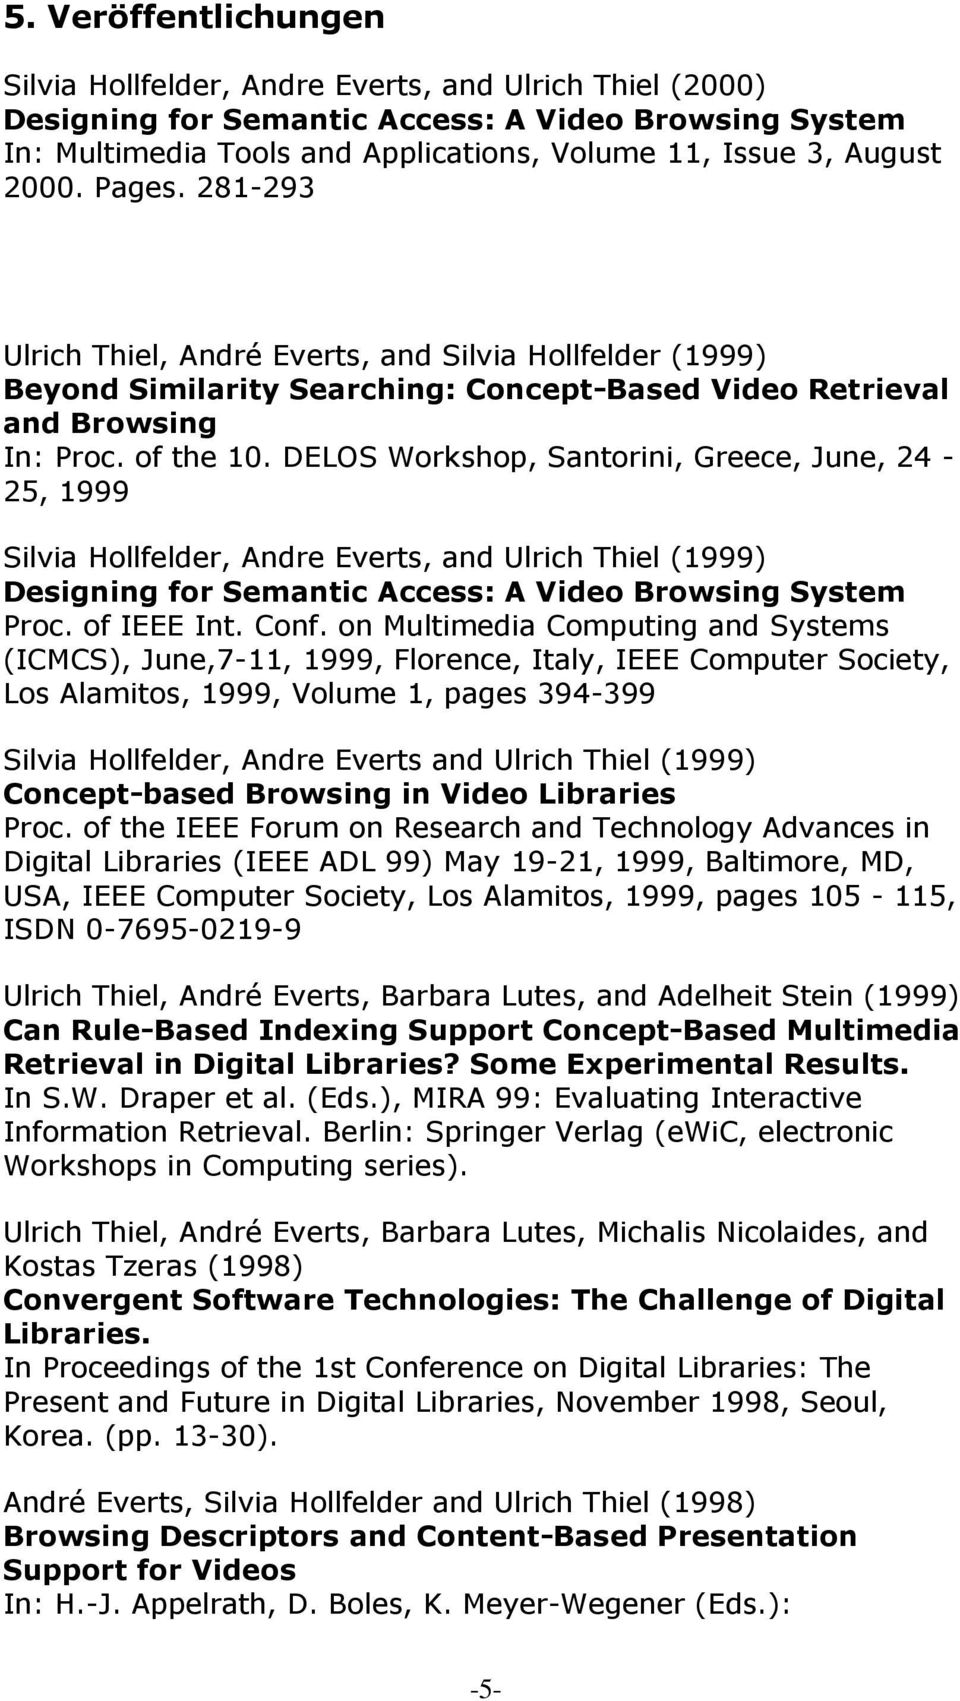 DELOS Workshop, Santorini, Greece, June, 24-25, 1999 Silvia Hollfelder, Andre Everts, and Ulrich Thiel (1999) Designing for Semantic Access: A Video Browsing System Proc. of IEEE Int. Conf.